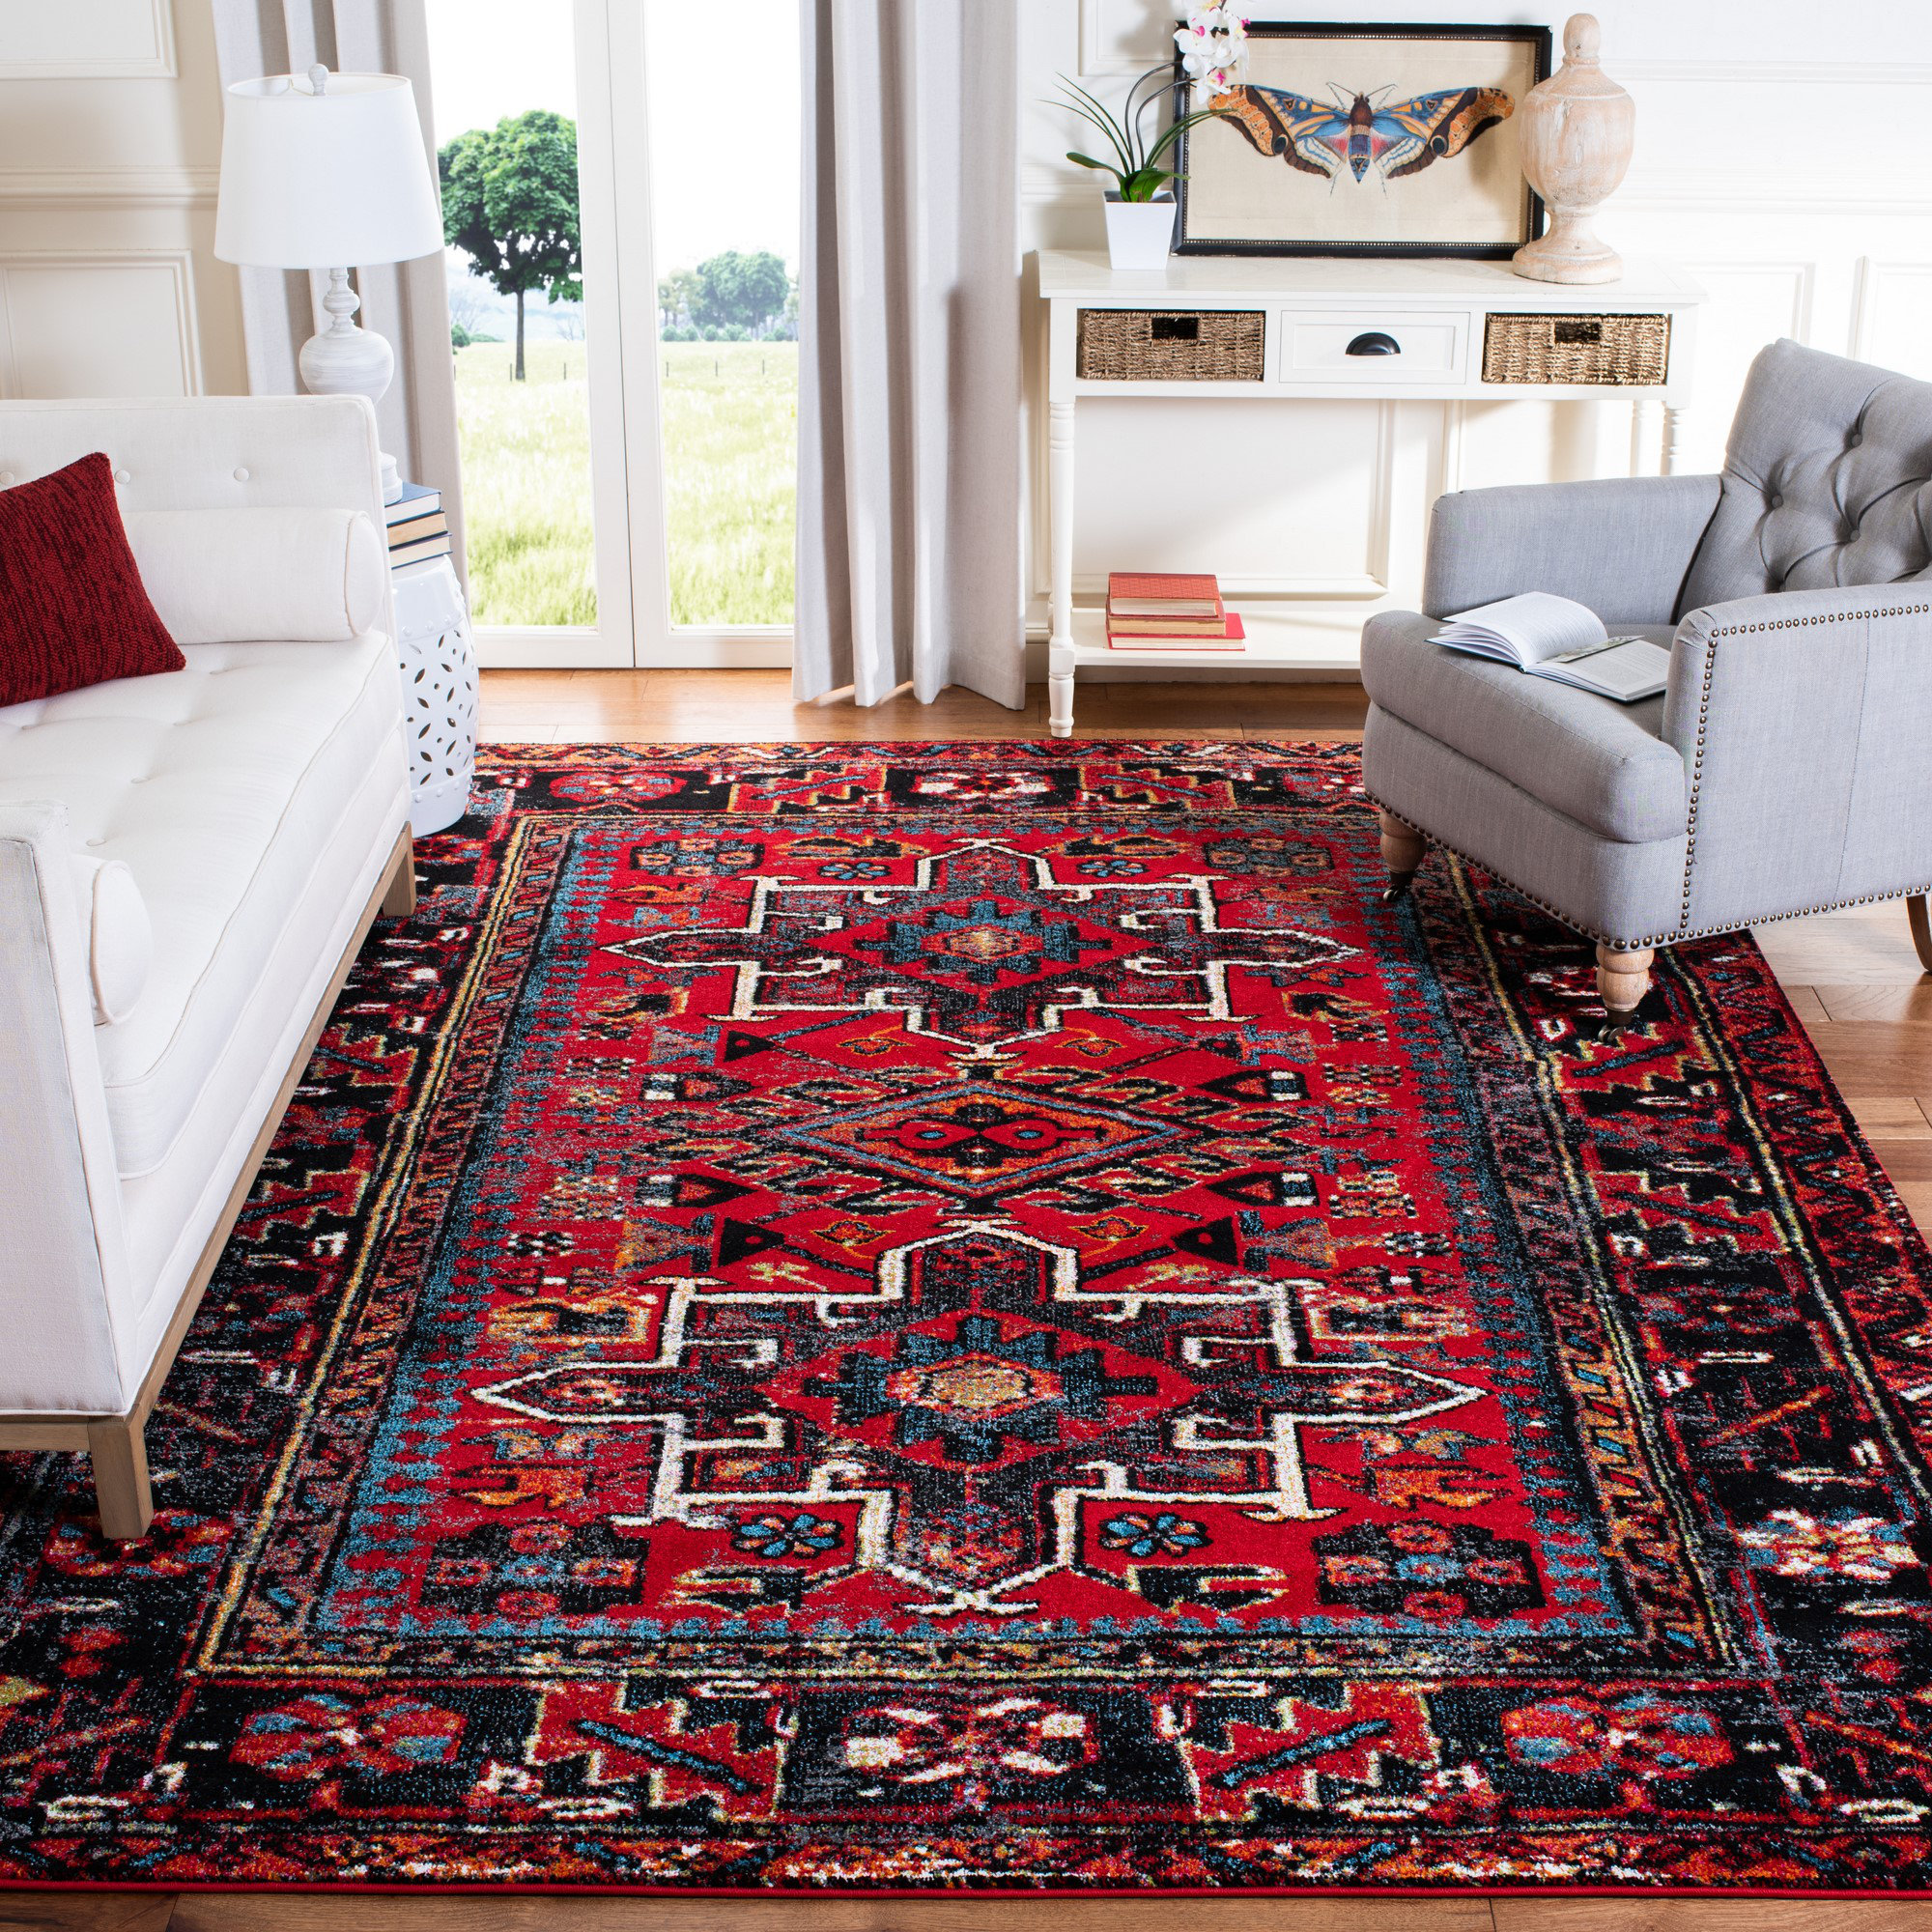 Wayfair   20' x 20' Red Area Rugs You'll Love in 20